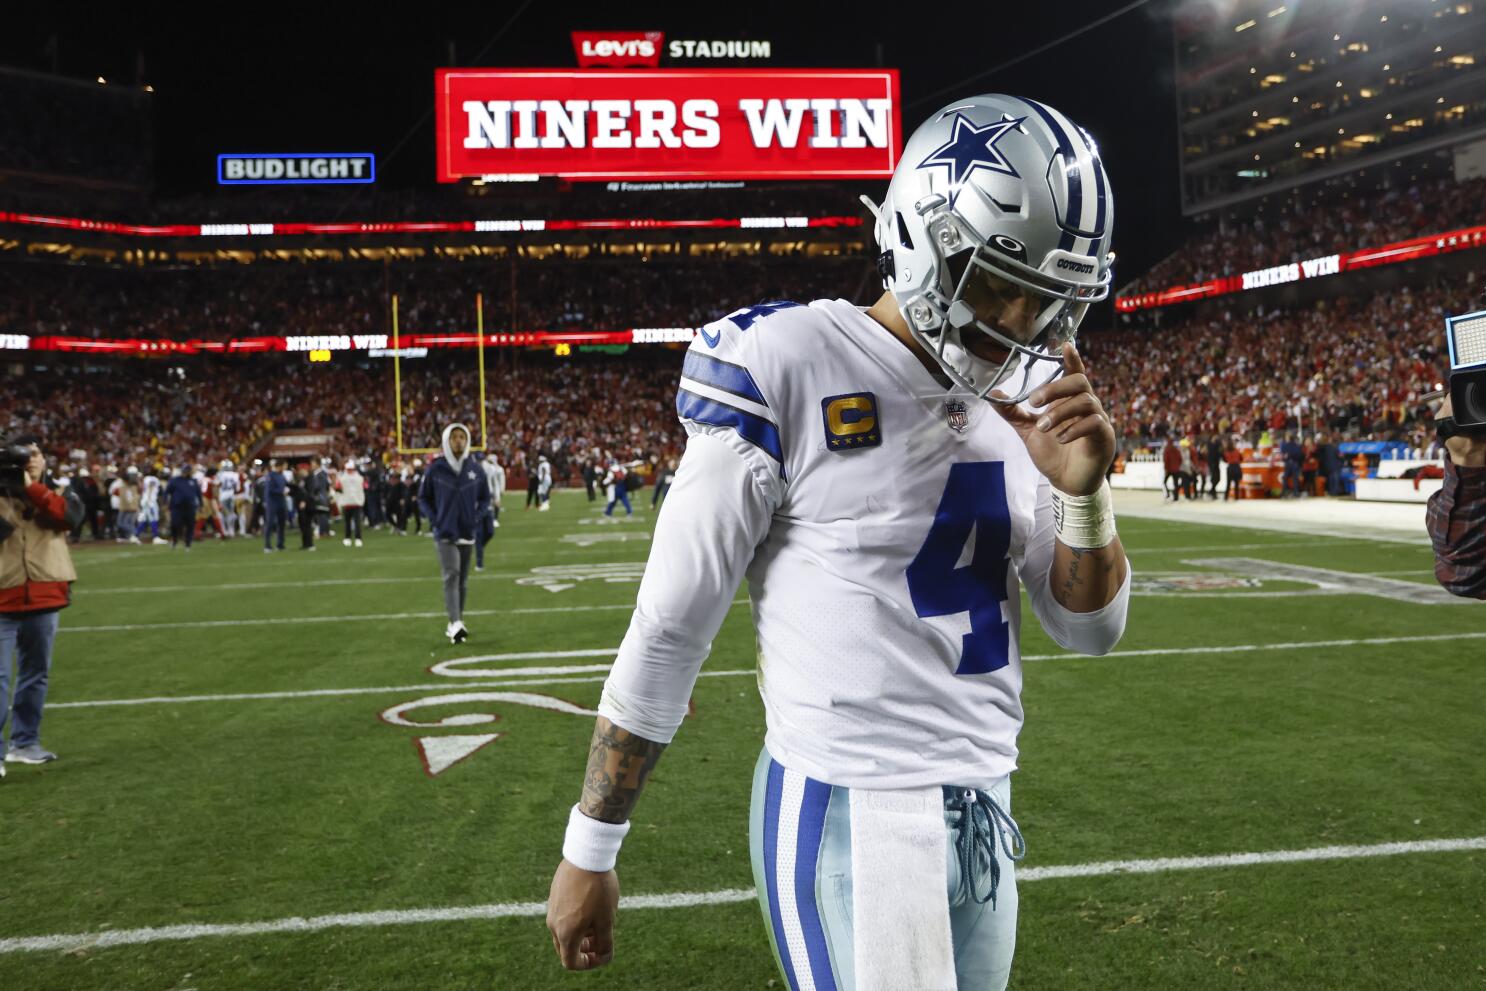 Jones frustrated as Cowboys fall short in playoffs again - The San